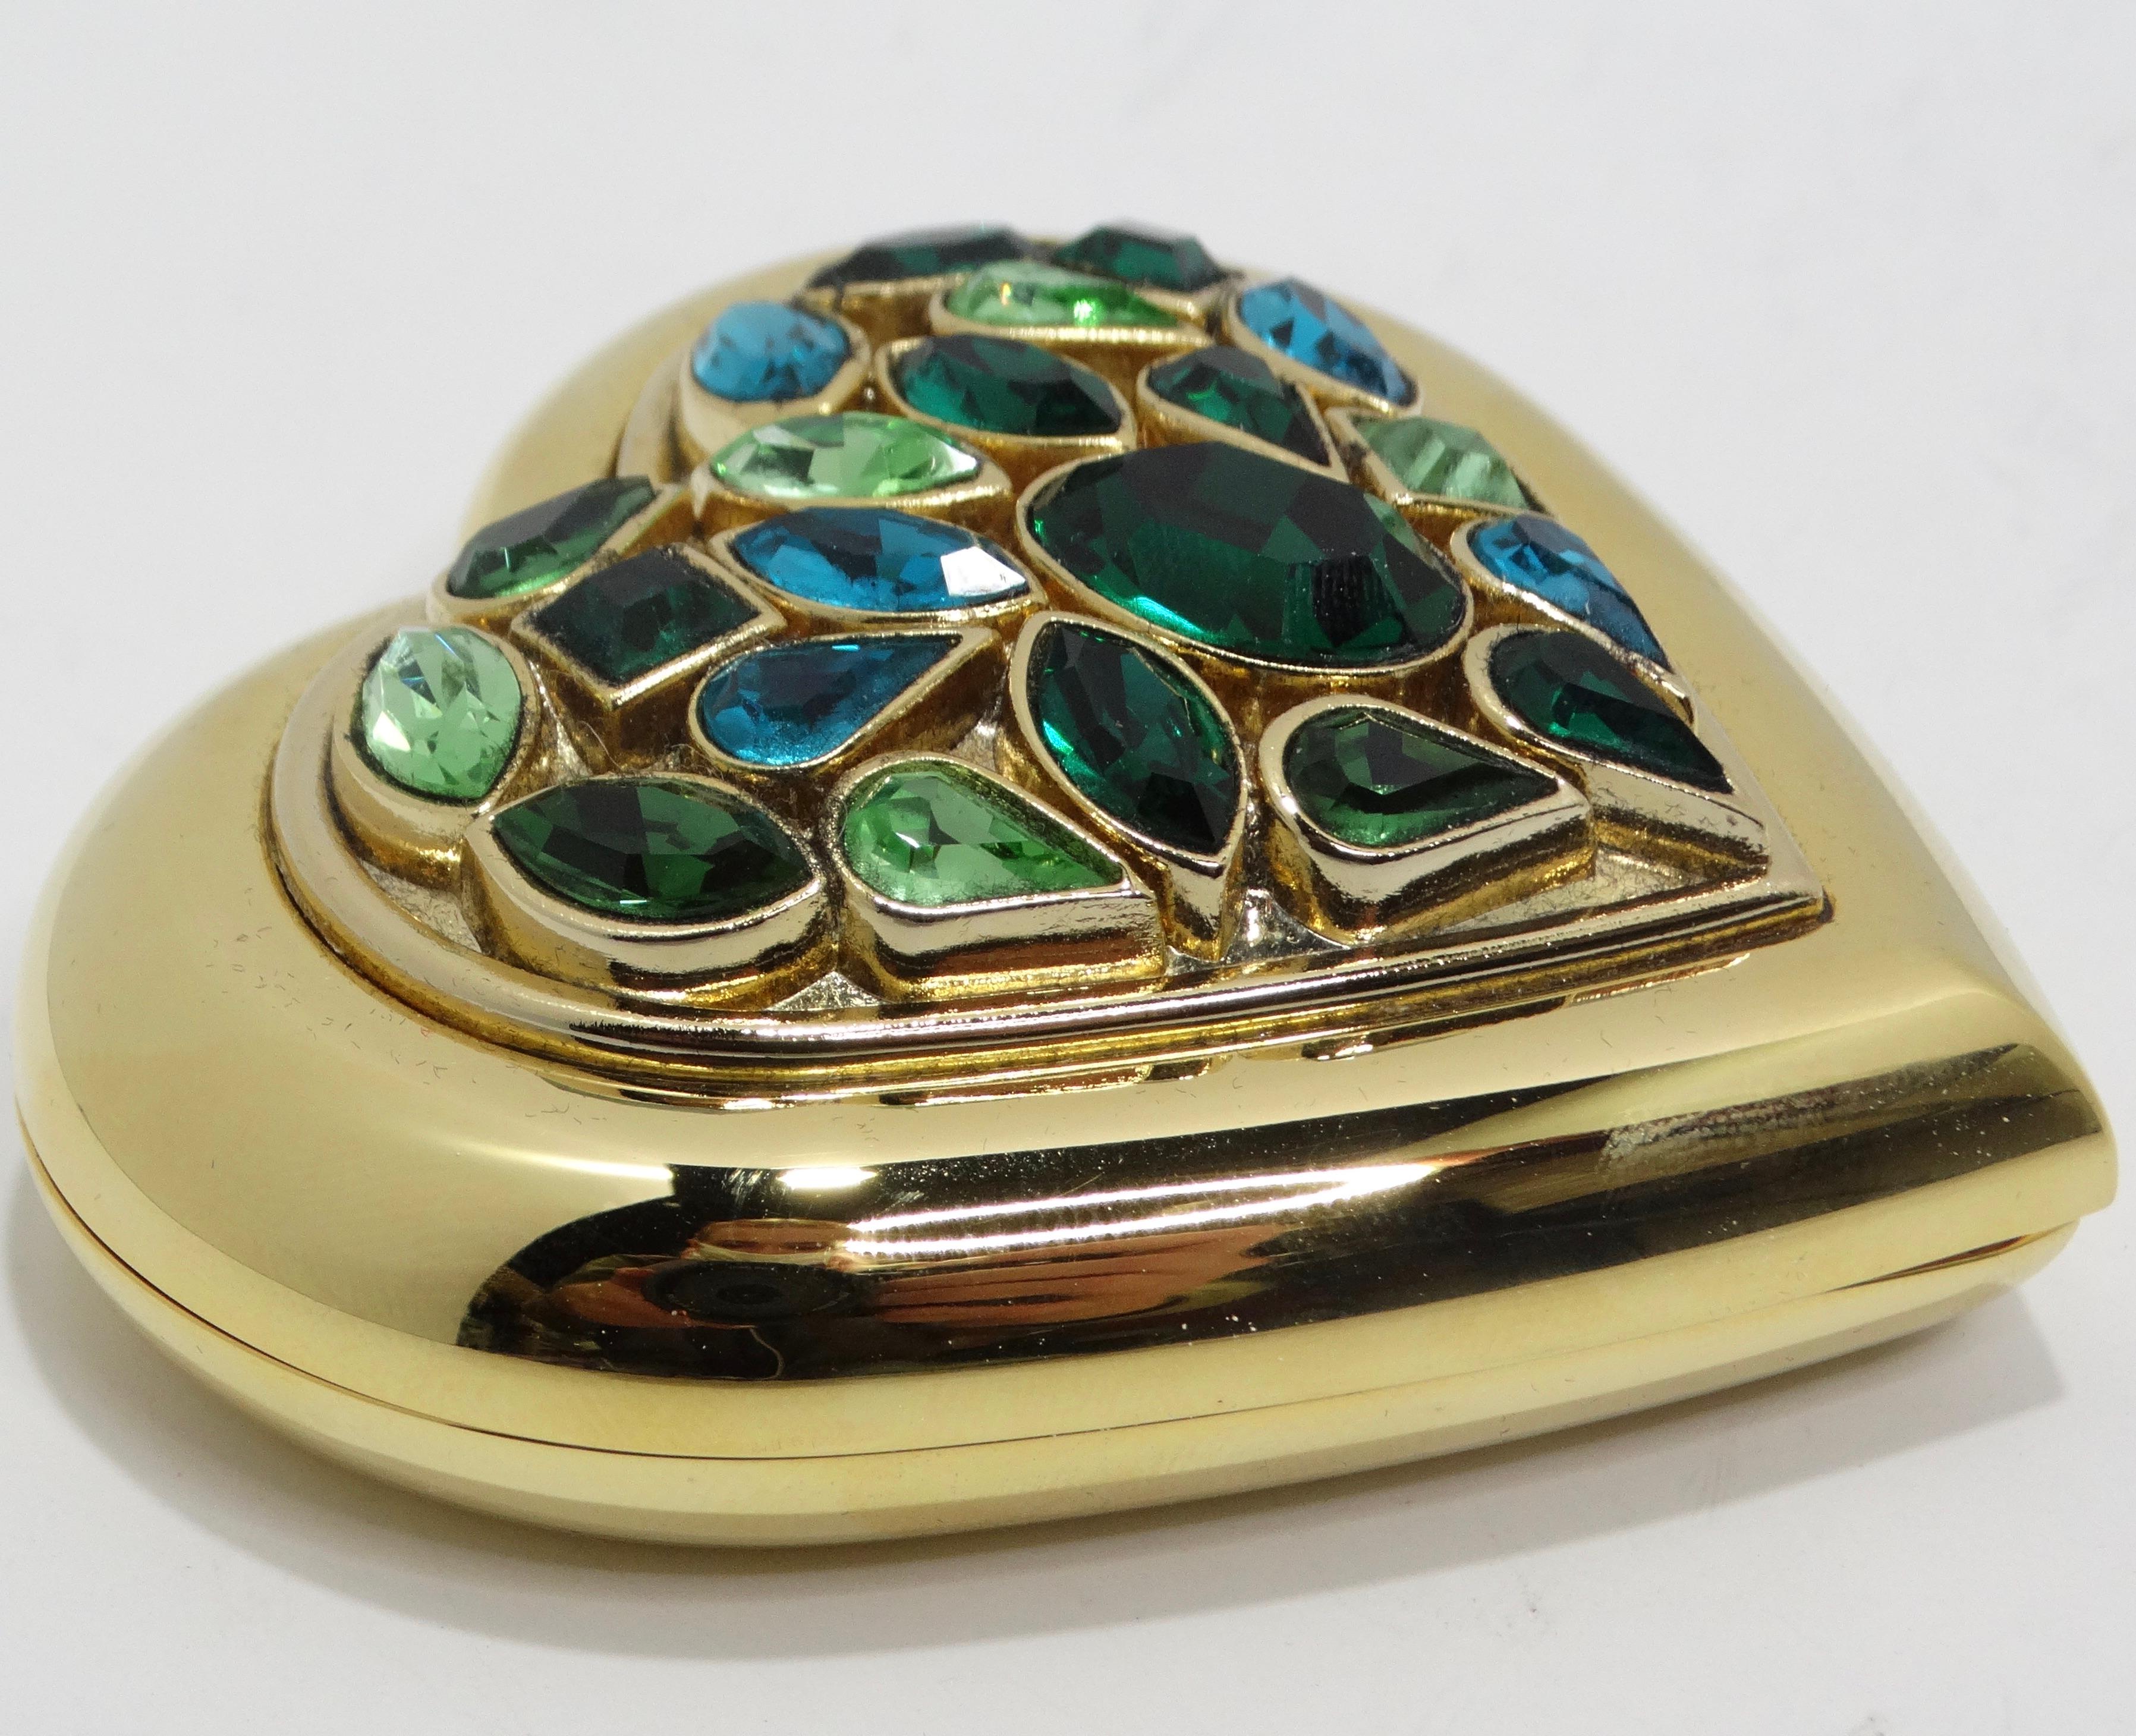 Yves Saint Laurent 1980s Gem Encrusted Heart Shaped Compact Mirror For Sale 1